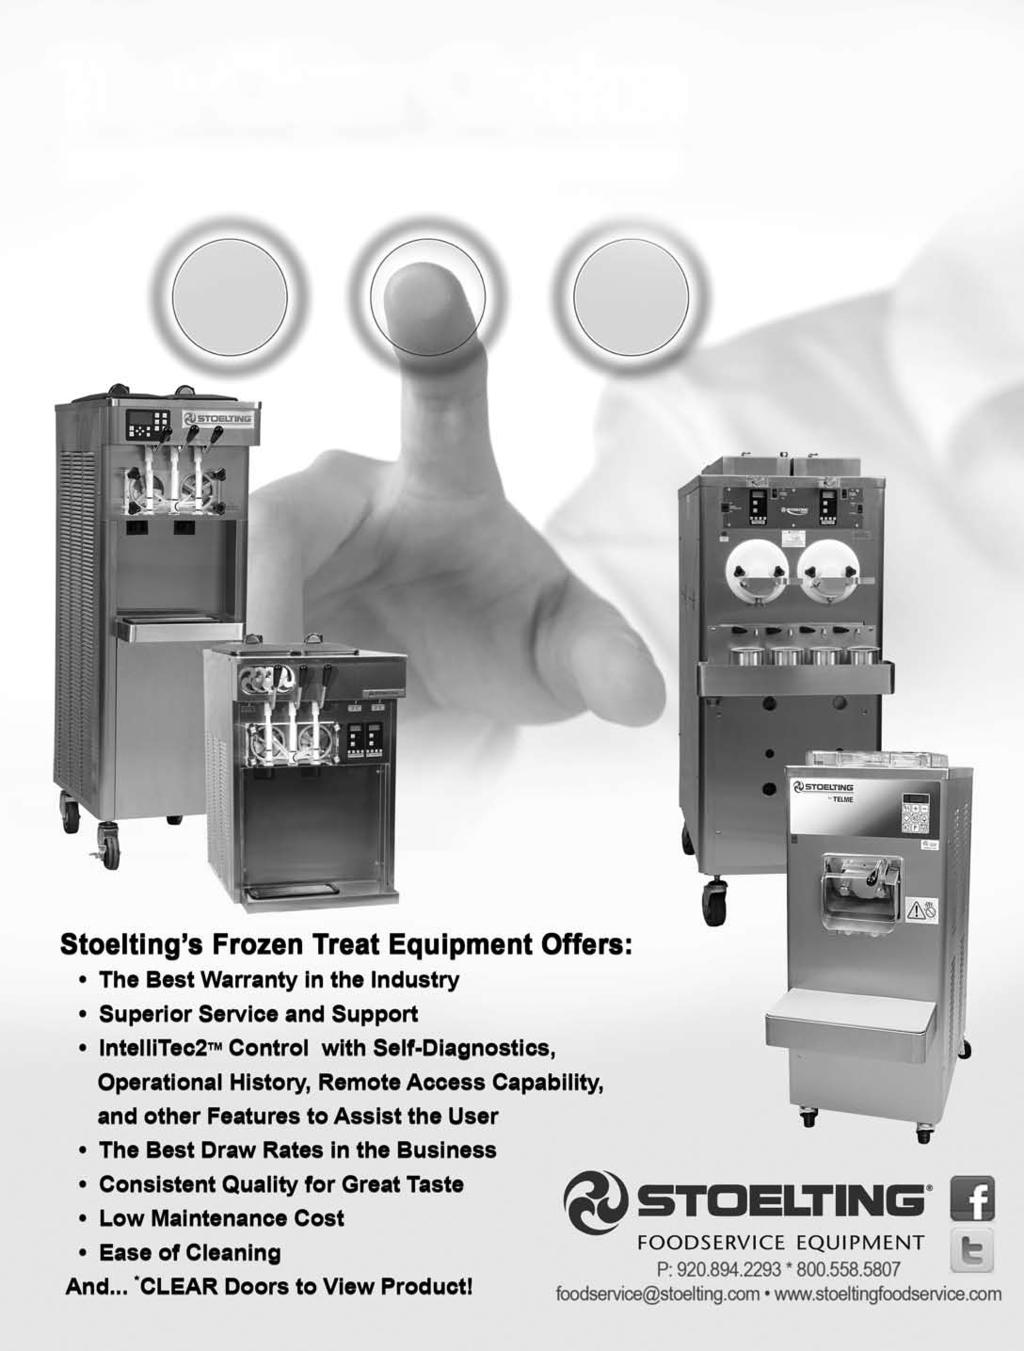 The Clear Choice for Frozen Treat Equipment P: 920.894.2293 * 800.